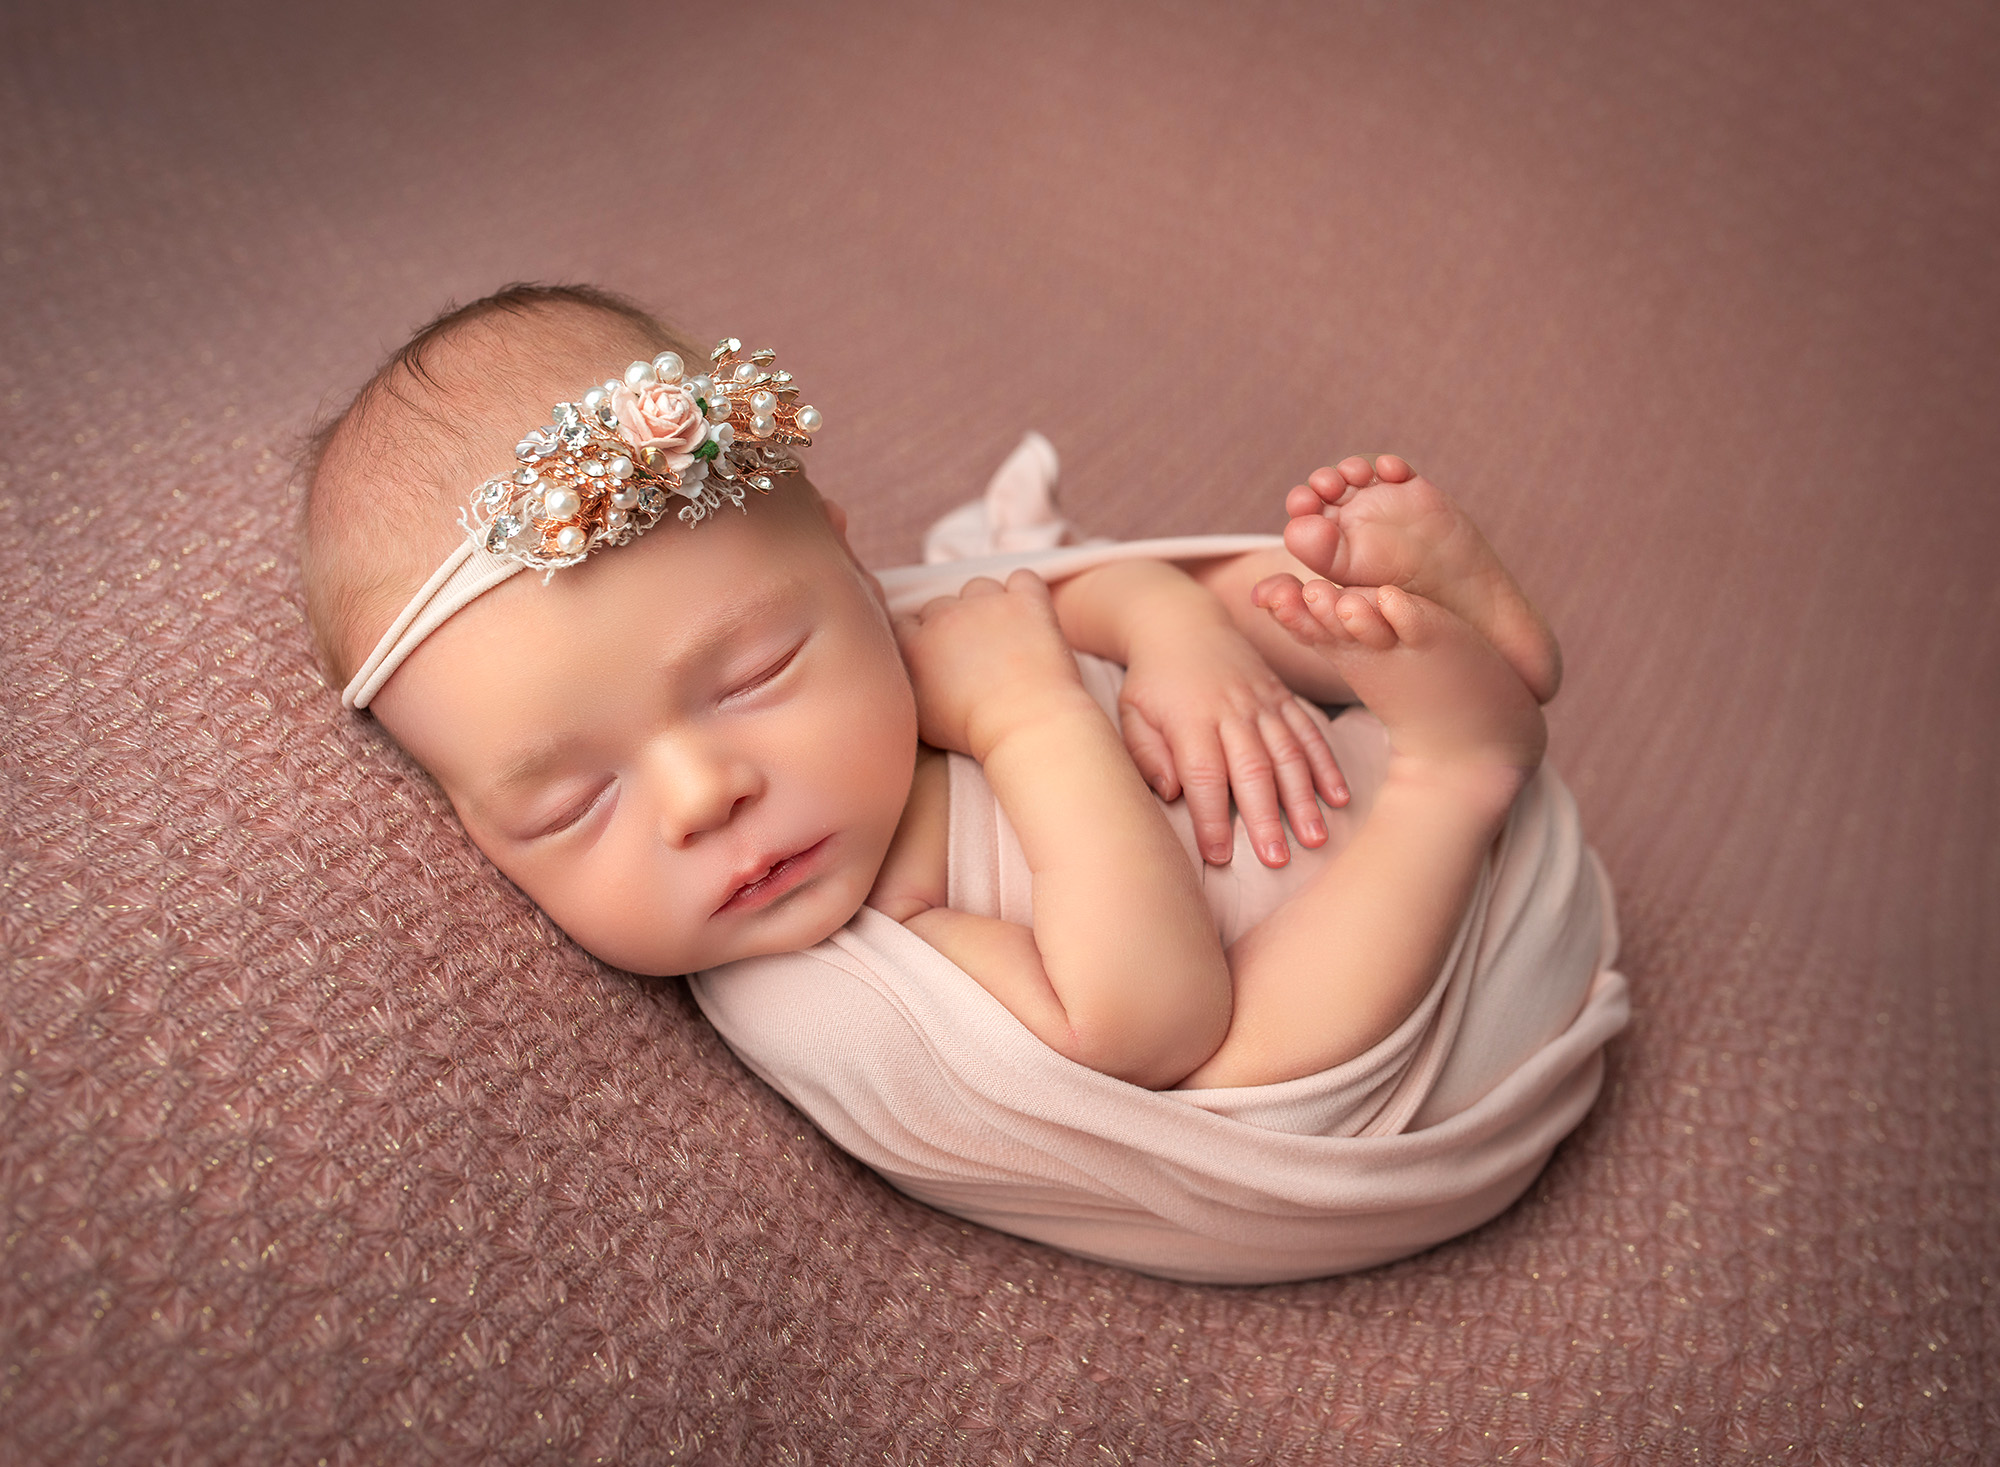 when should you take newborn photos baby girl sleeping wrapped up